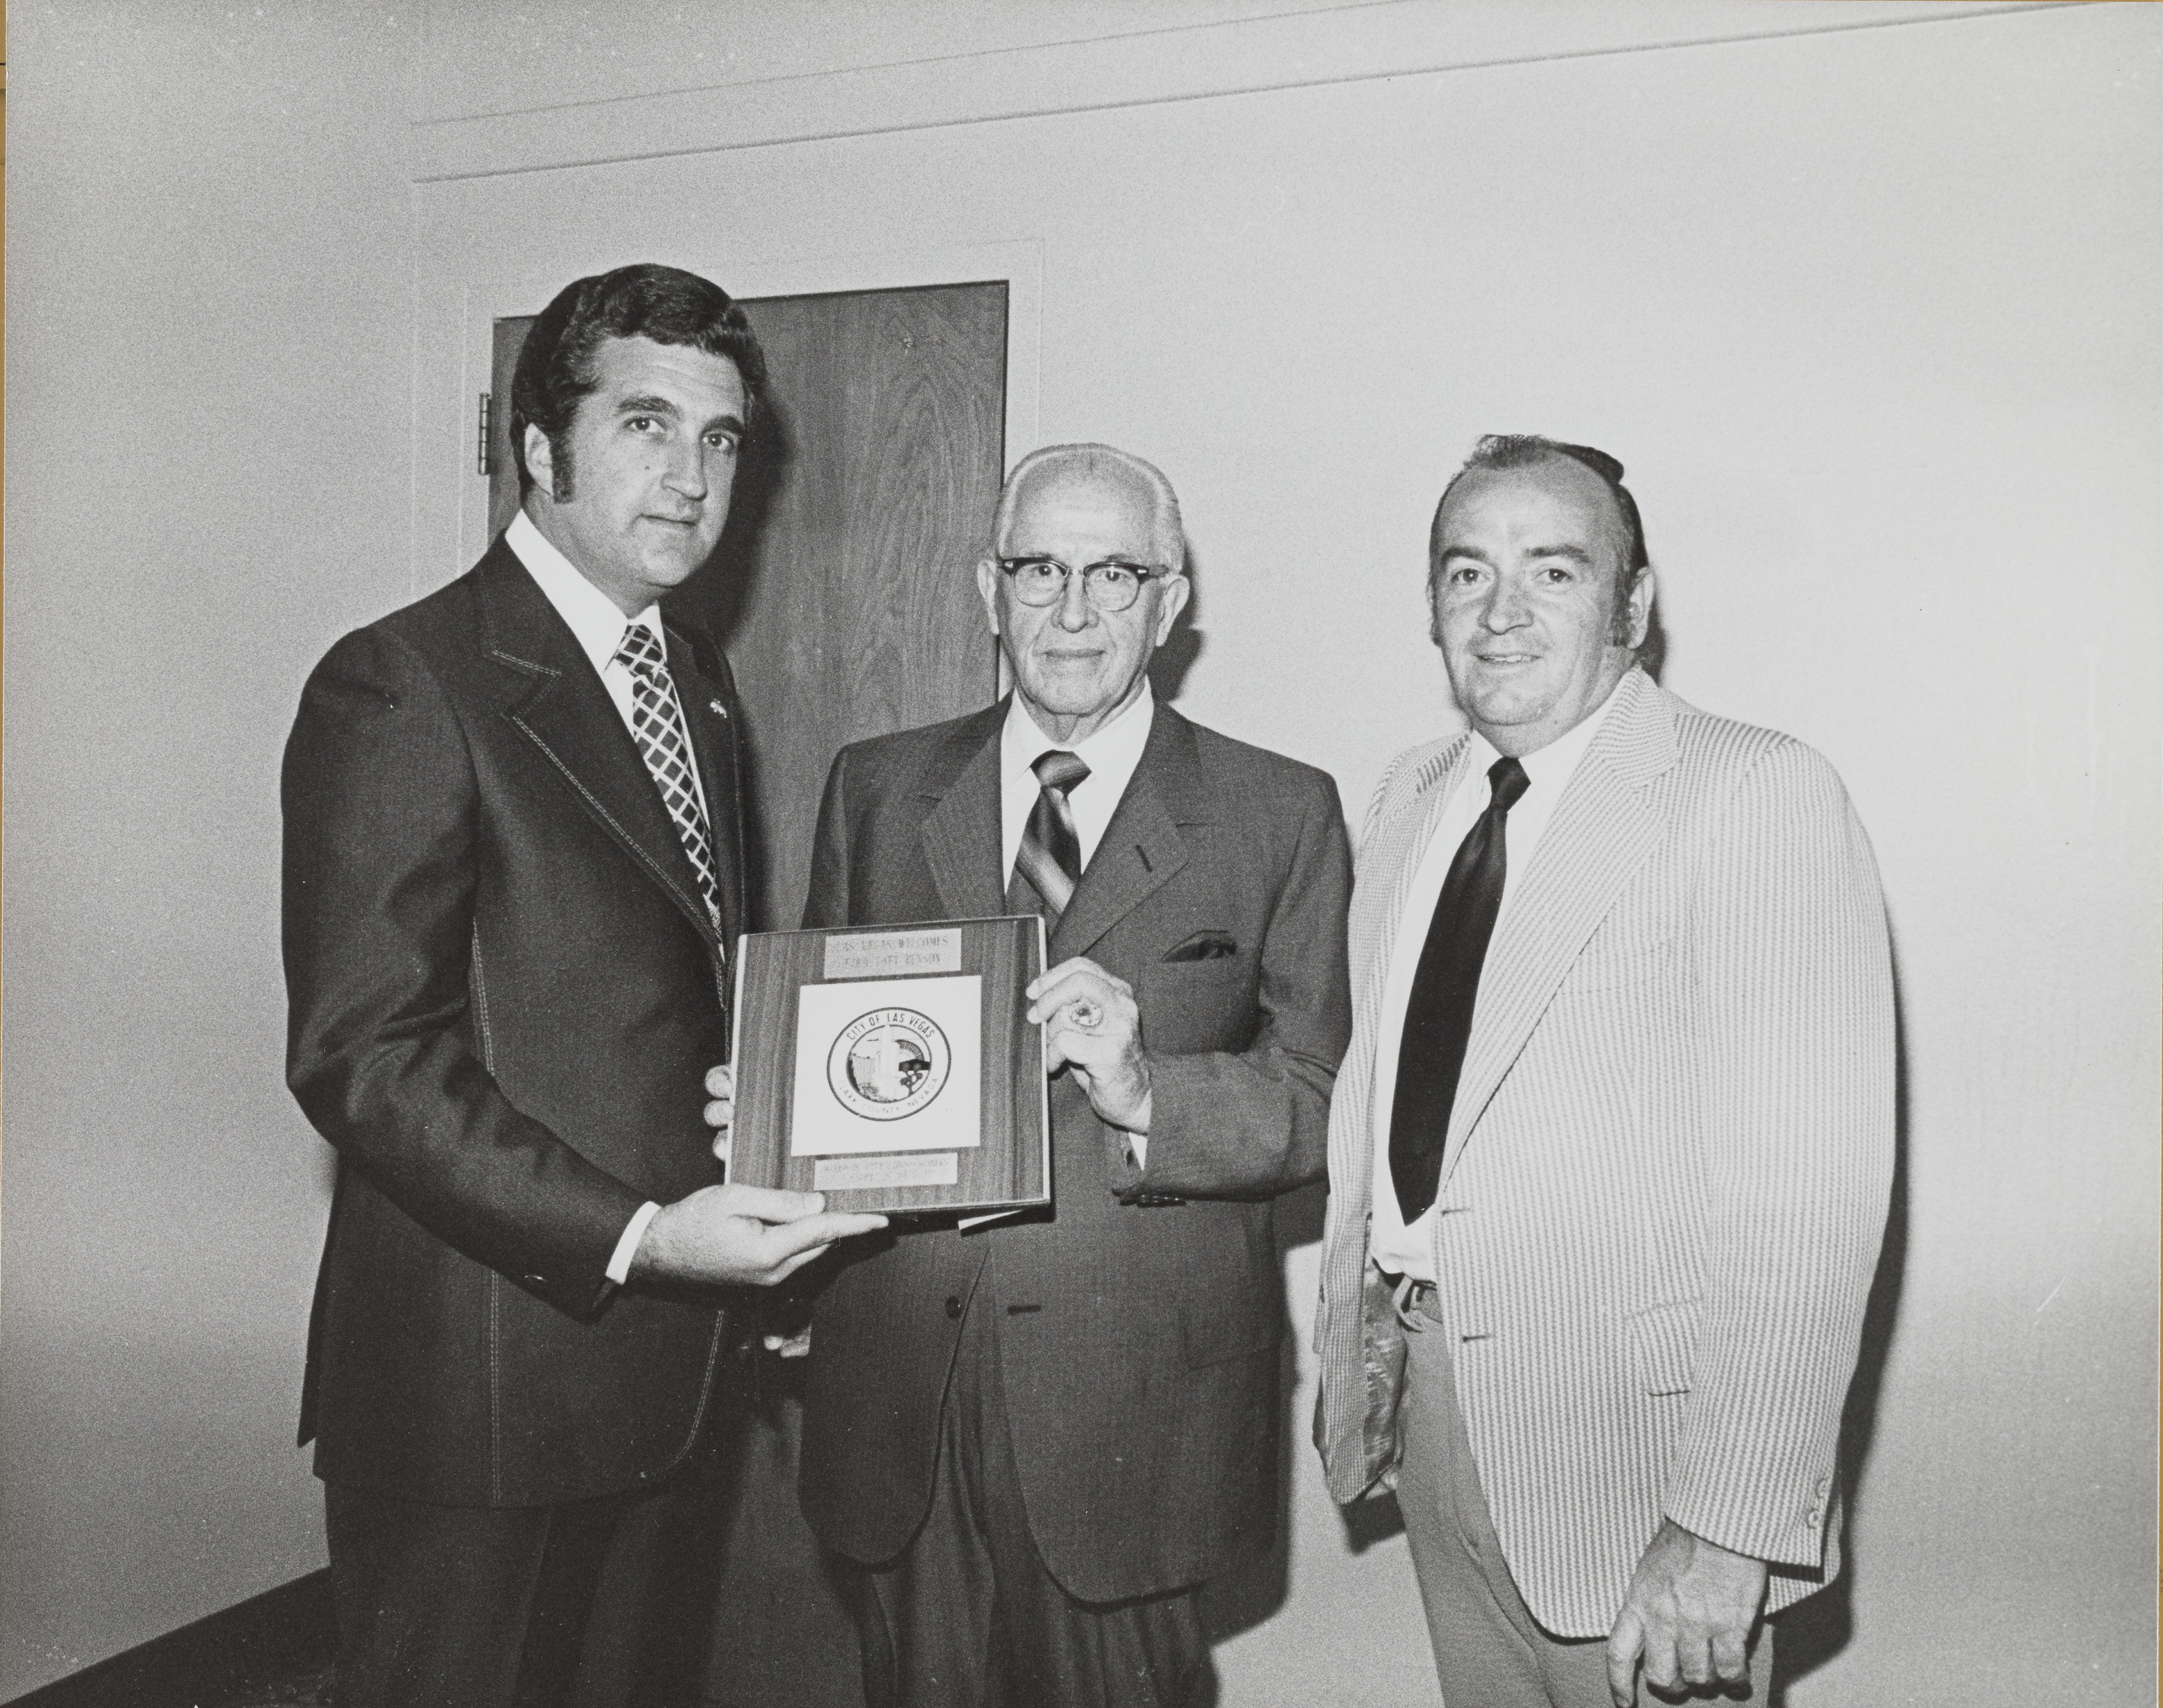 Photograph of Ron Lurie presenting plaque